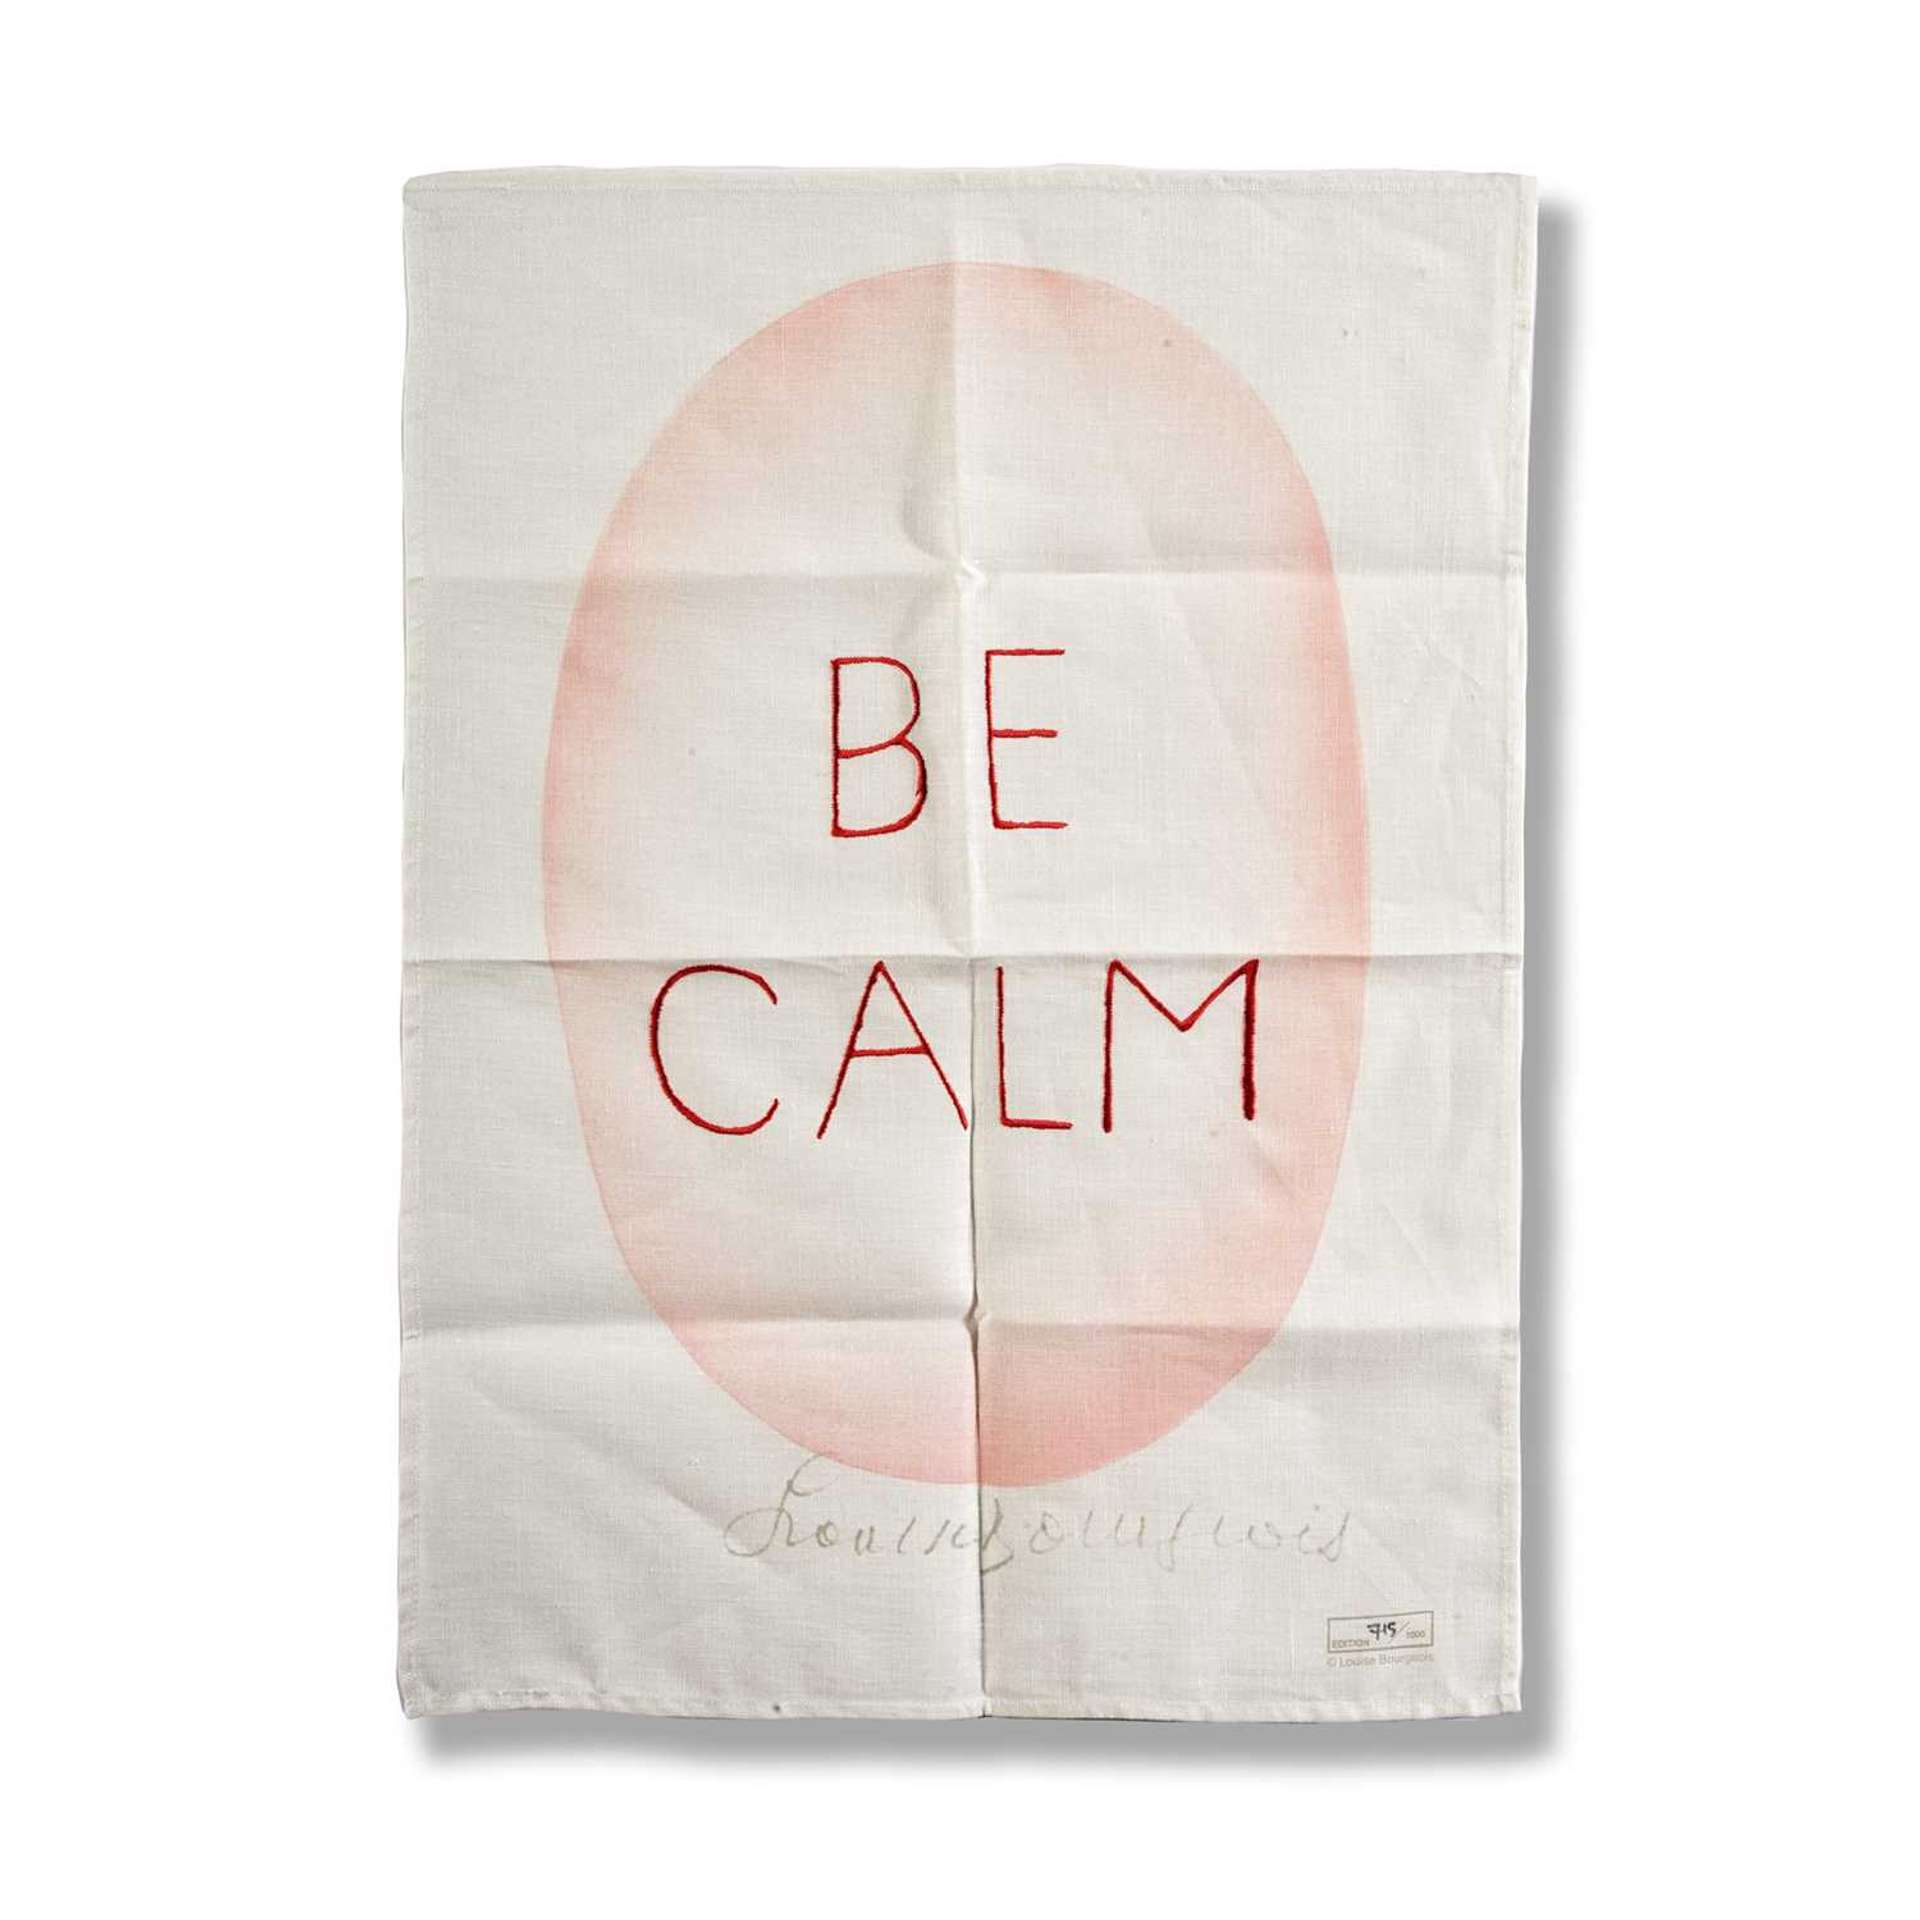 Be Calm by Louise Bourgeois (2005). The print features a red-shaded oval and the red inscription "BE CALM" within.